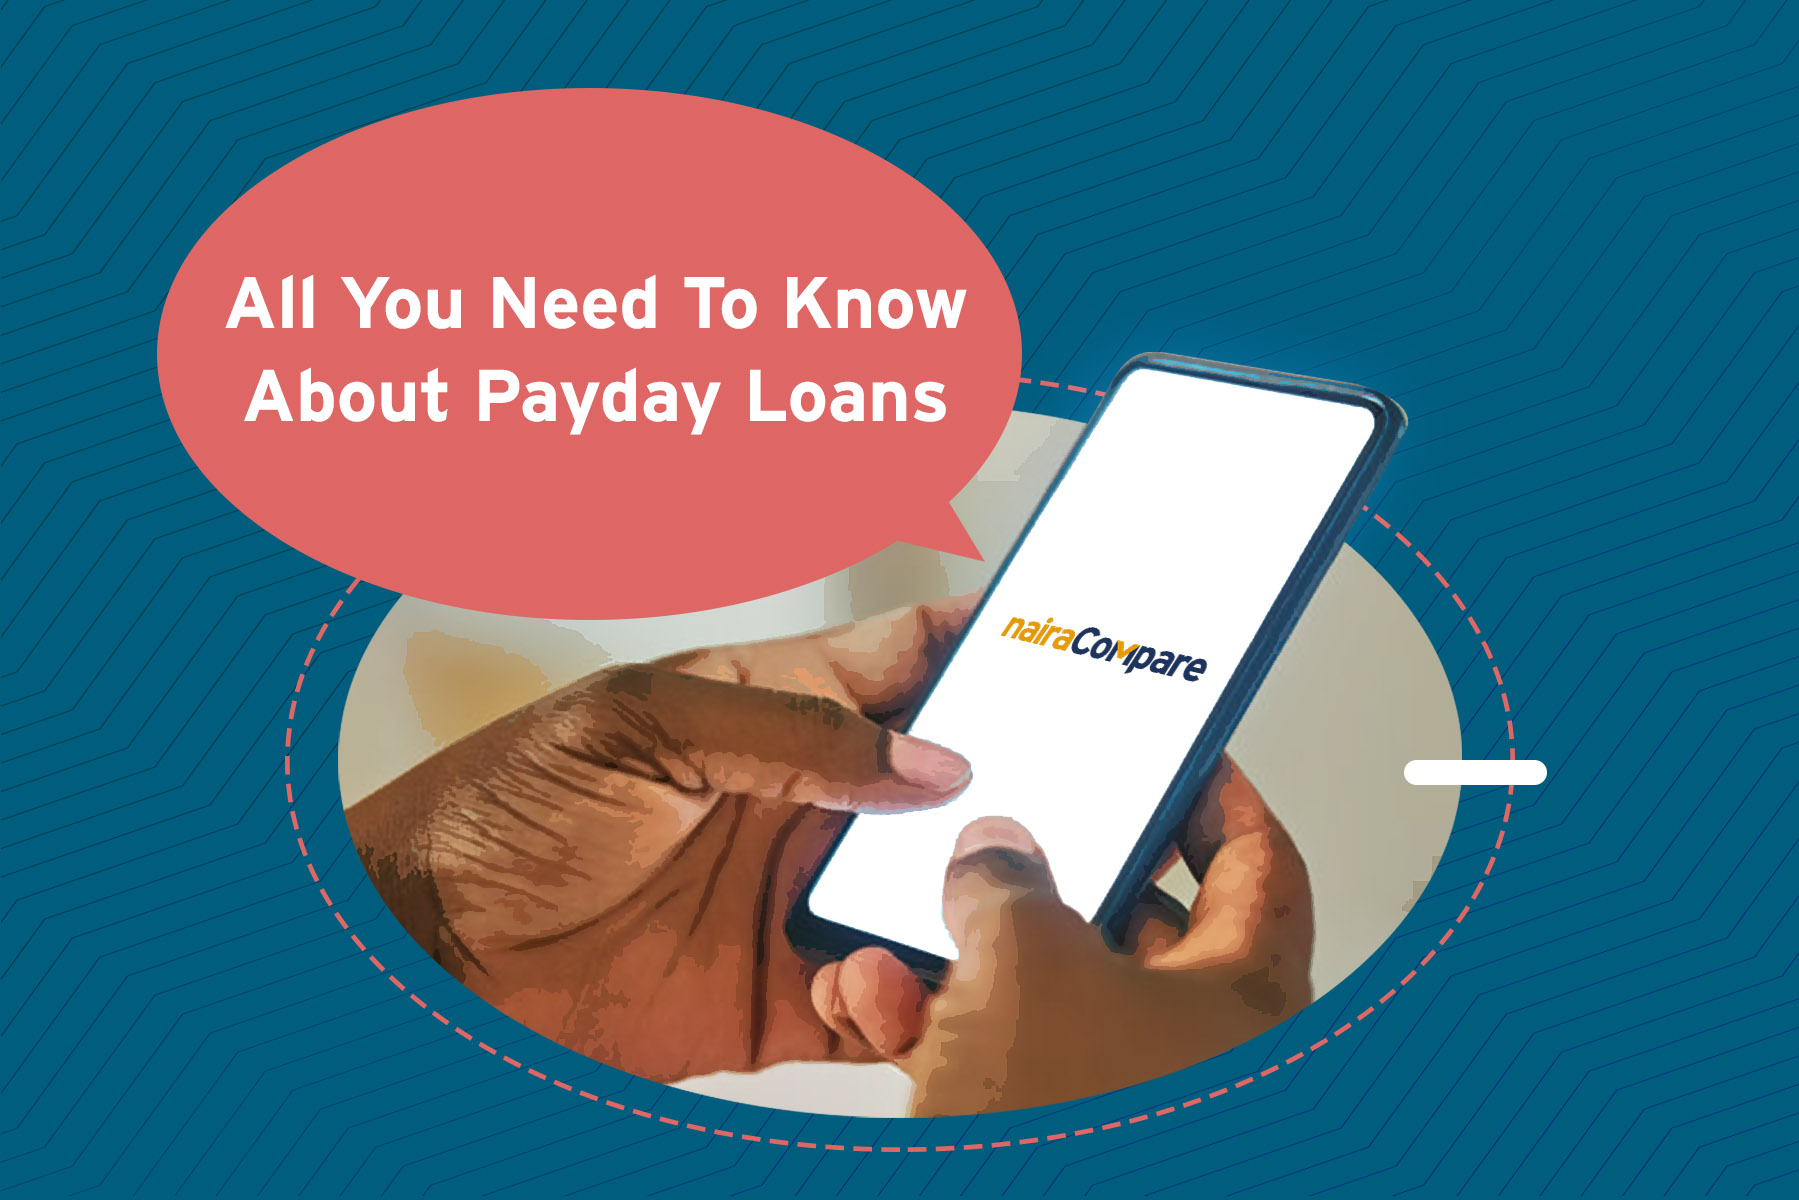 All You Need To Know About Payday Loans